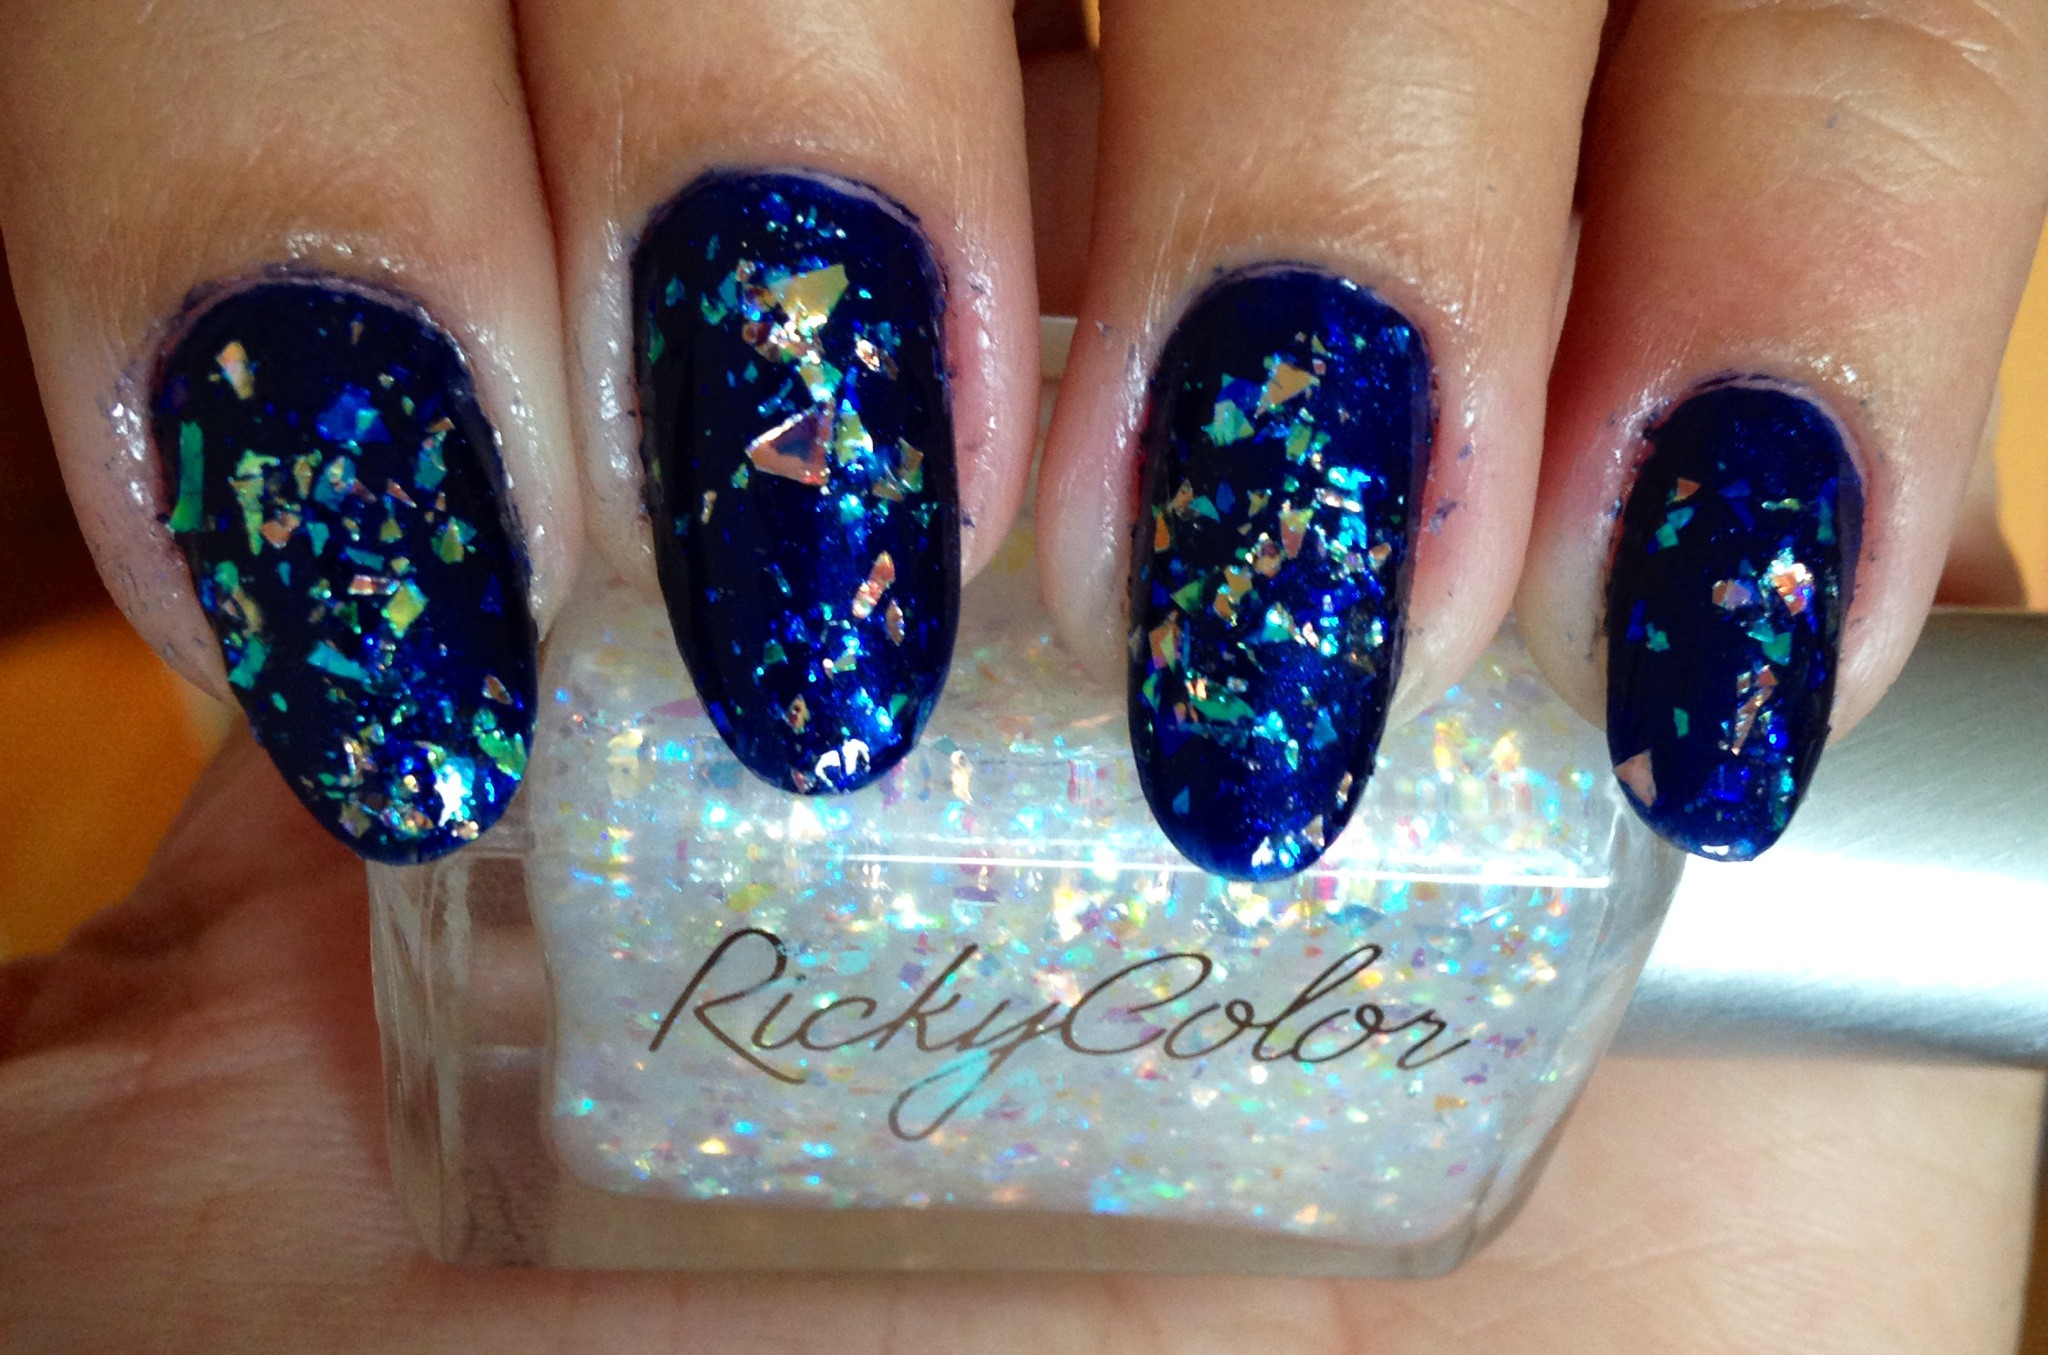 Holographic Glitter Nails
 Ricky Color in Fire Island Ferry nail polish